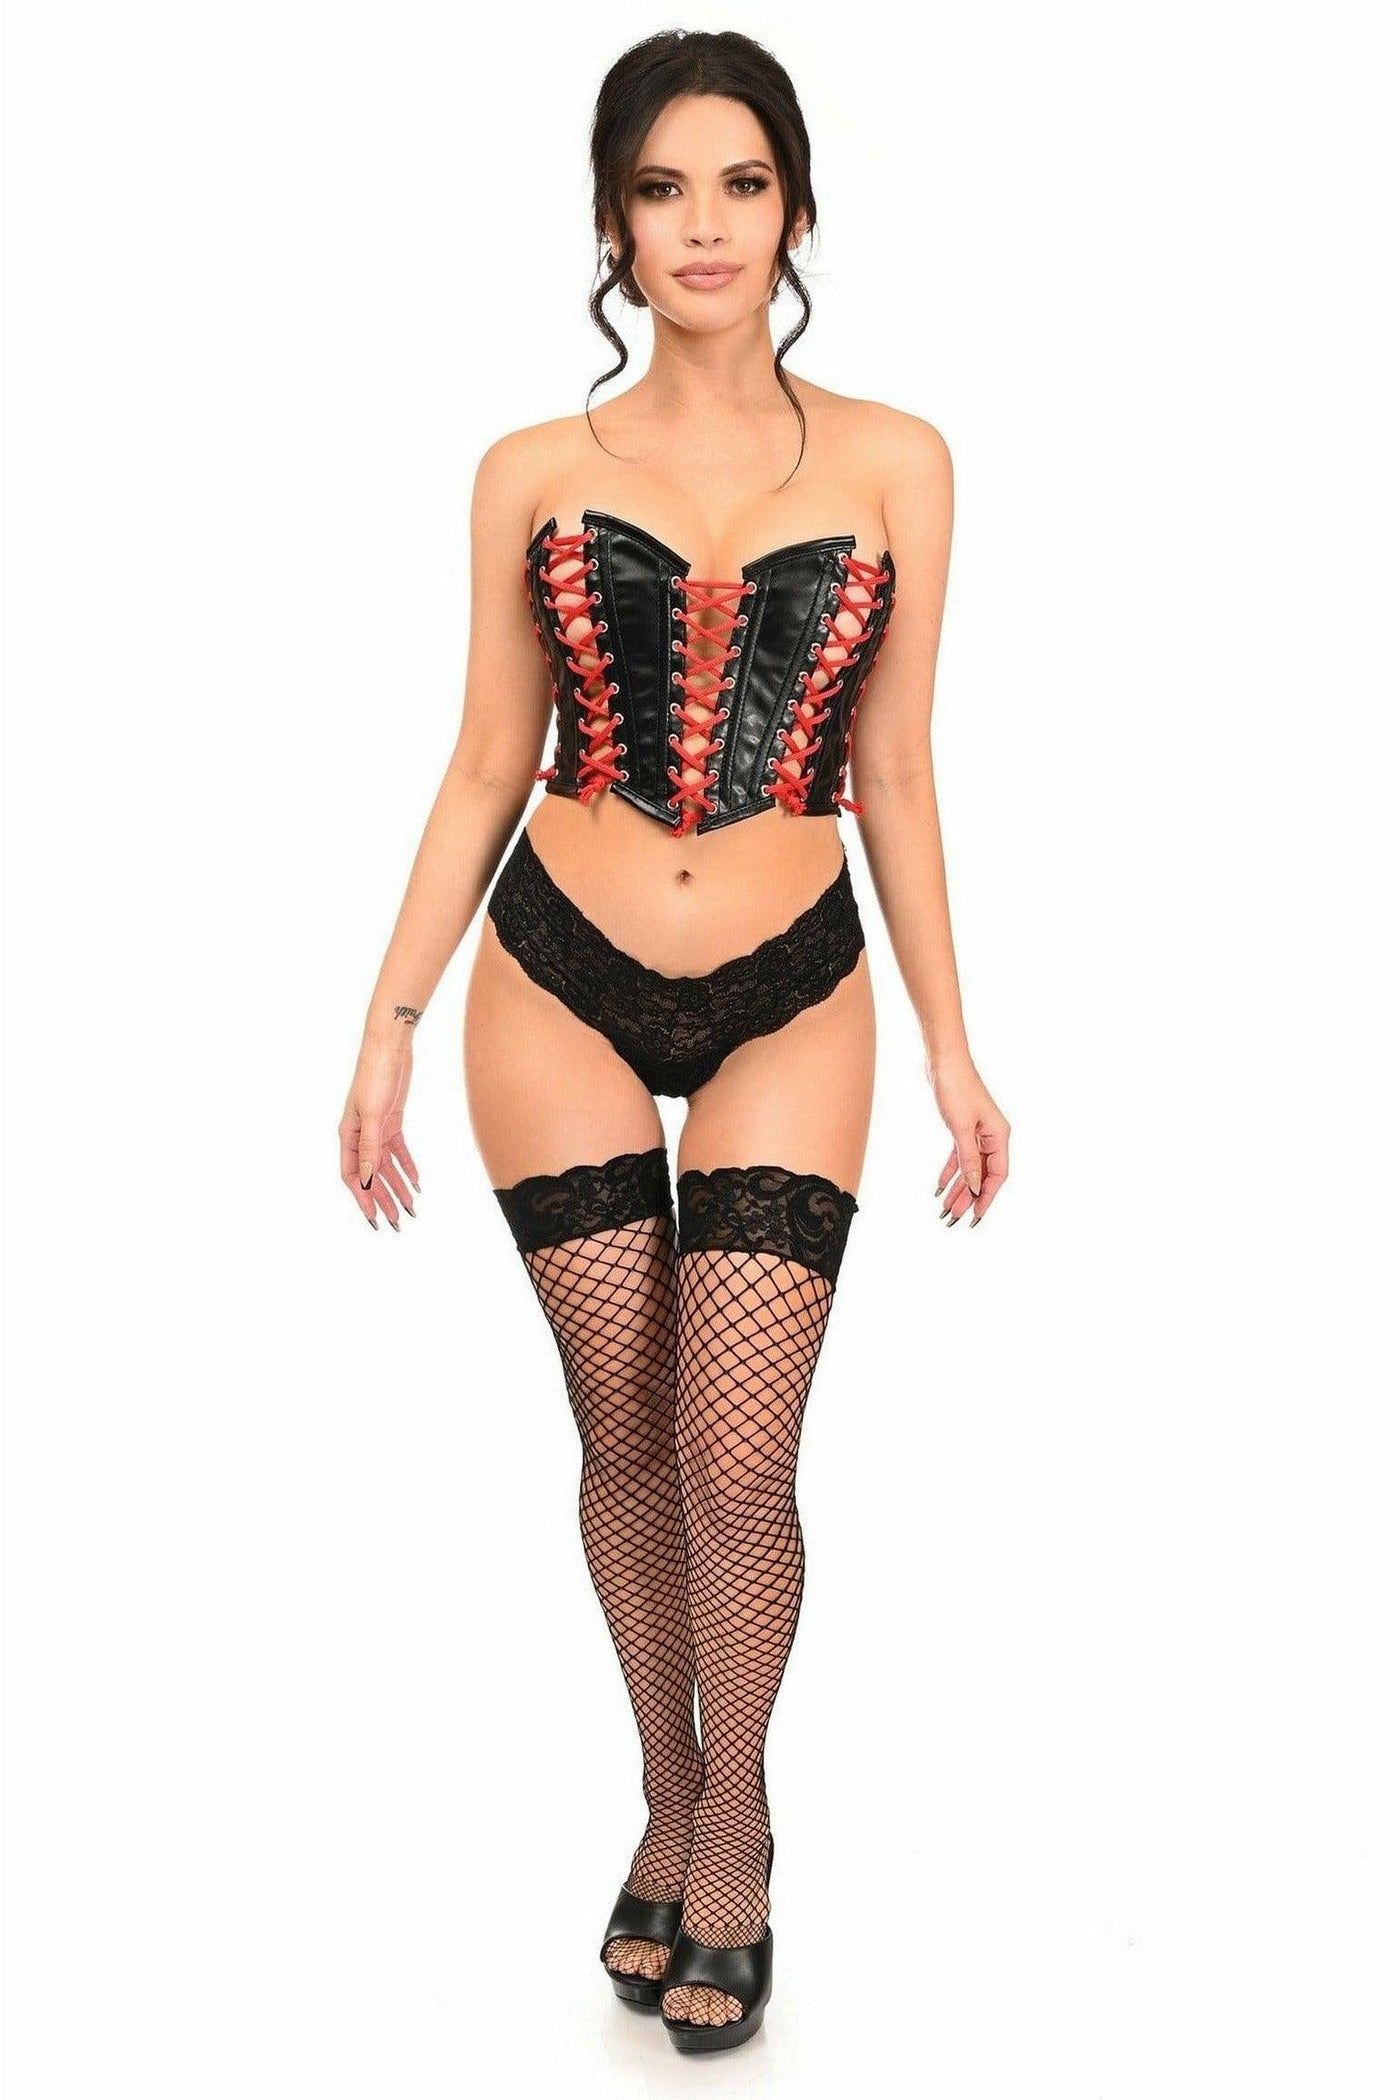 Lavish Black Faux Leather w/Red Lacing Lace-Up Bustier - Daisy Corsets